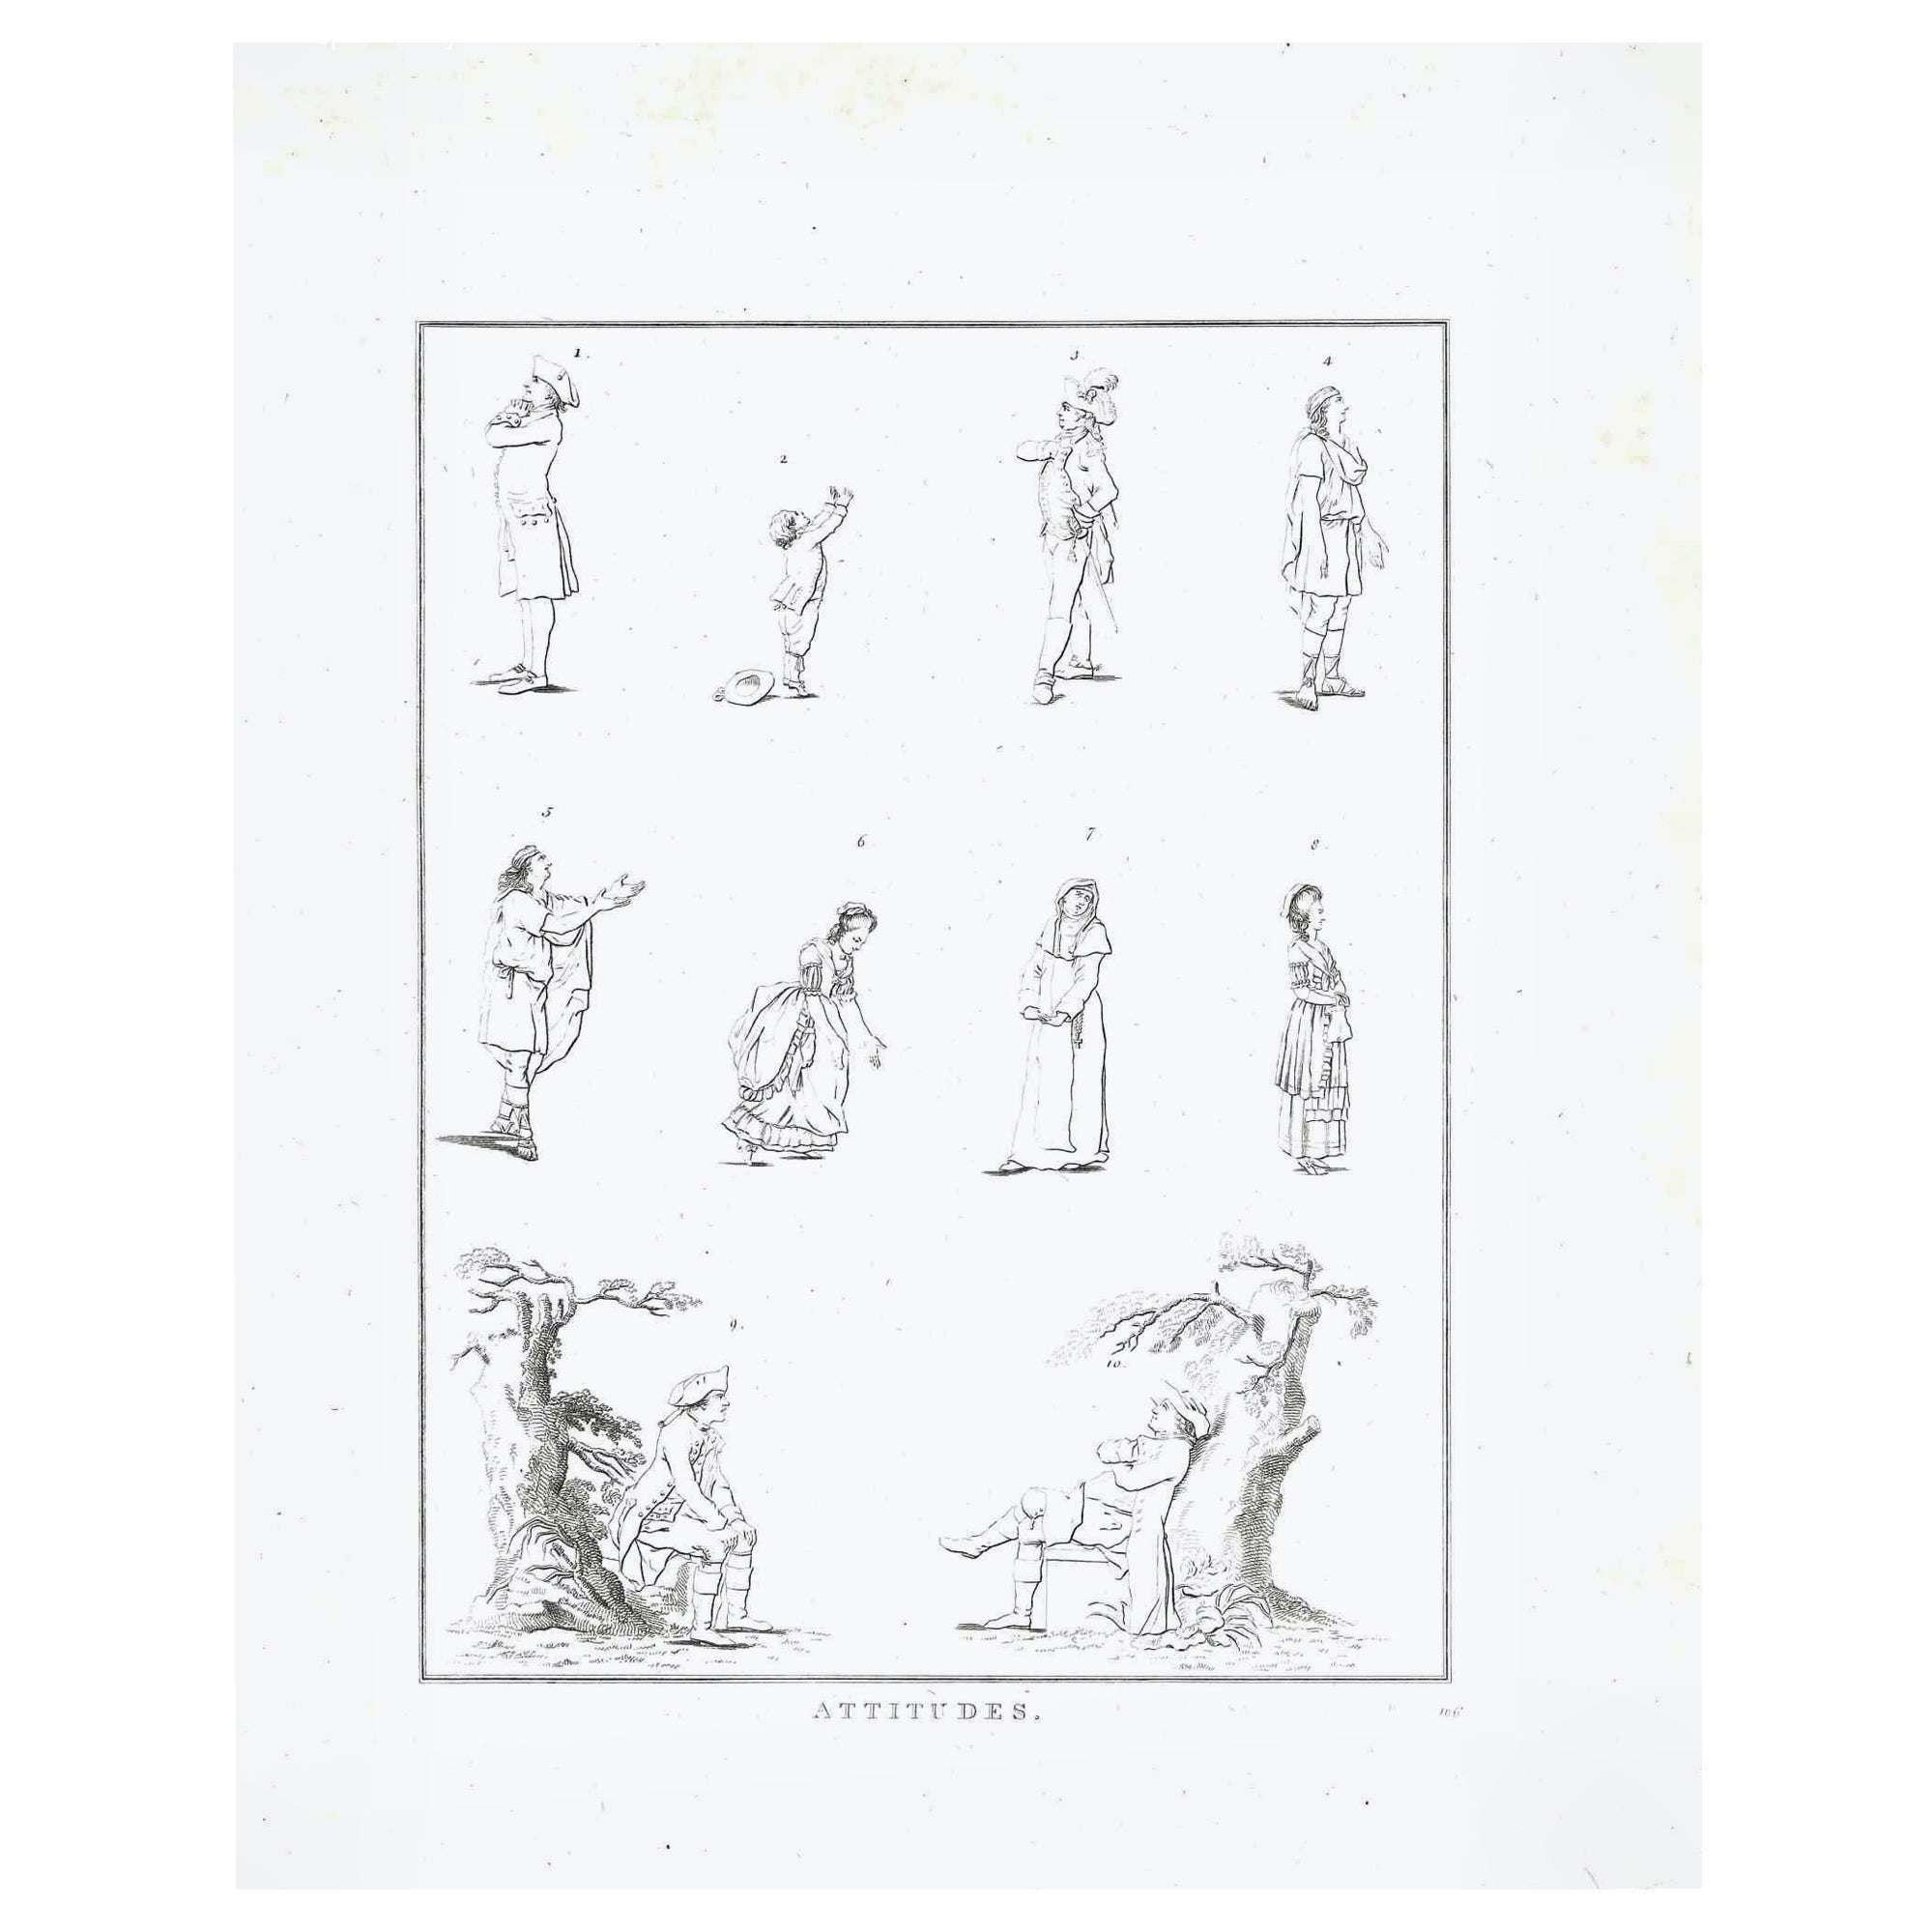 Figures - The Physiognomy is an original etching artwork realized by Thomas Holloway for Johann Caspar Lavater's "Essays on Physiognomy, Designed to Promote the Knowledge and the Love of Mankind", London, Bensley, 1810. 

Good conditions.

Johann